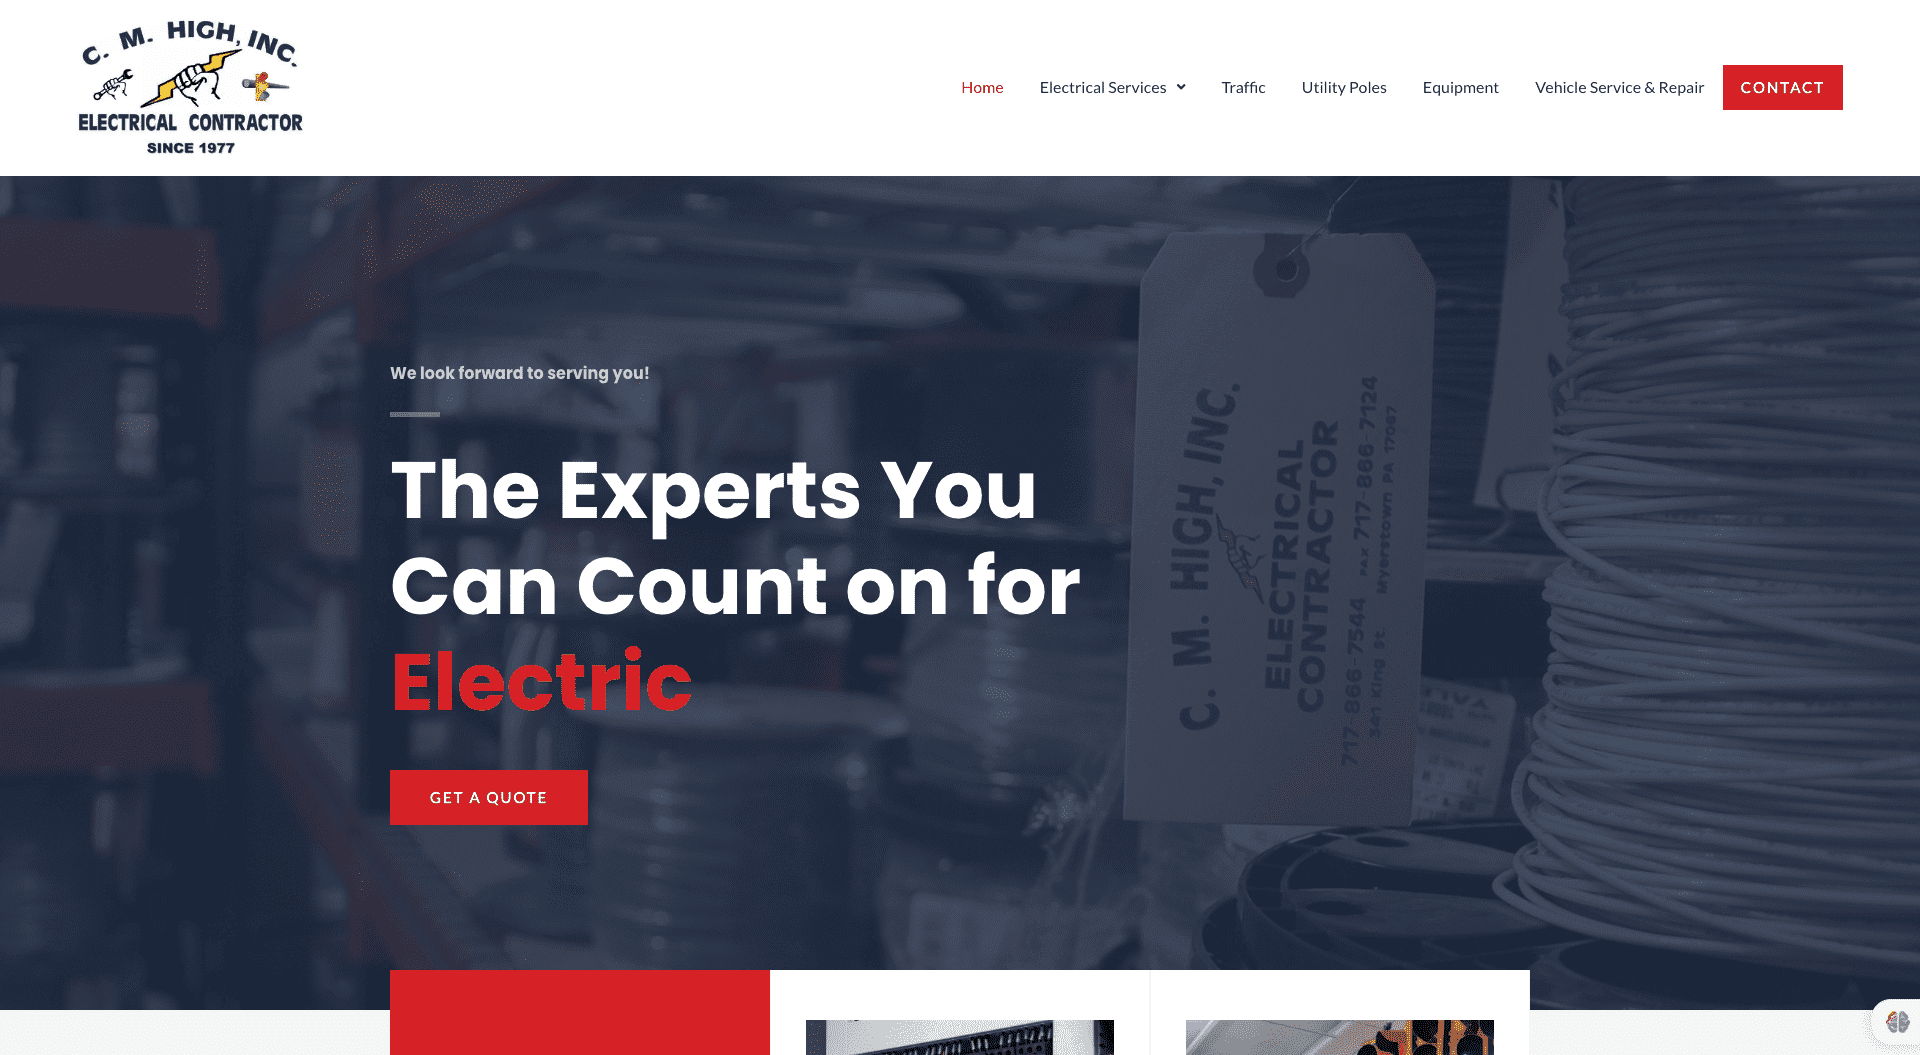 C.M. High Inc. website design for an electrical company.